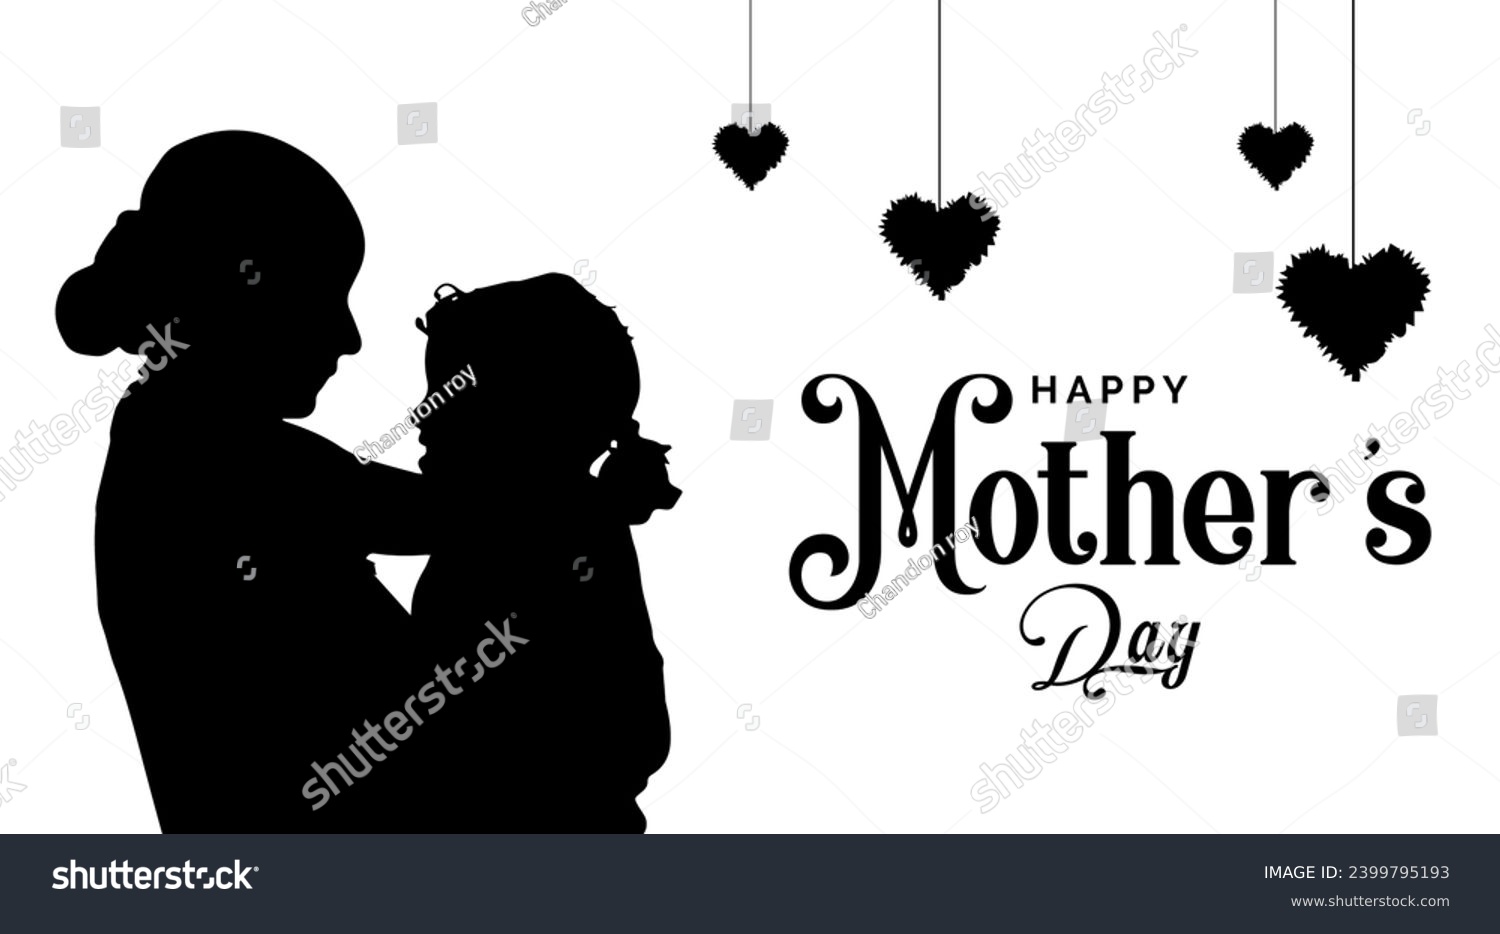 SVG of Vector silhouette of happy mothers day mother holding child. svg